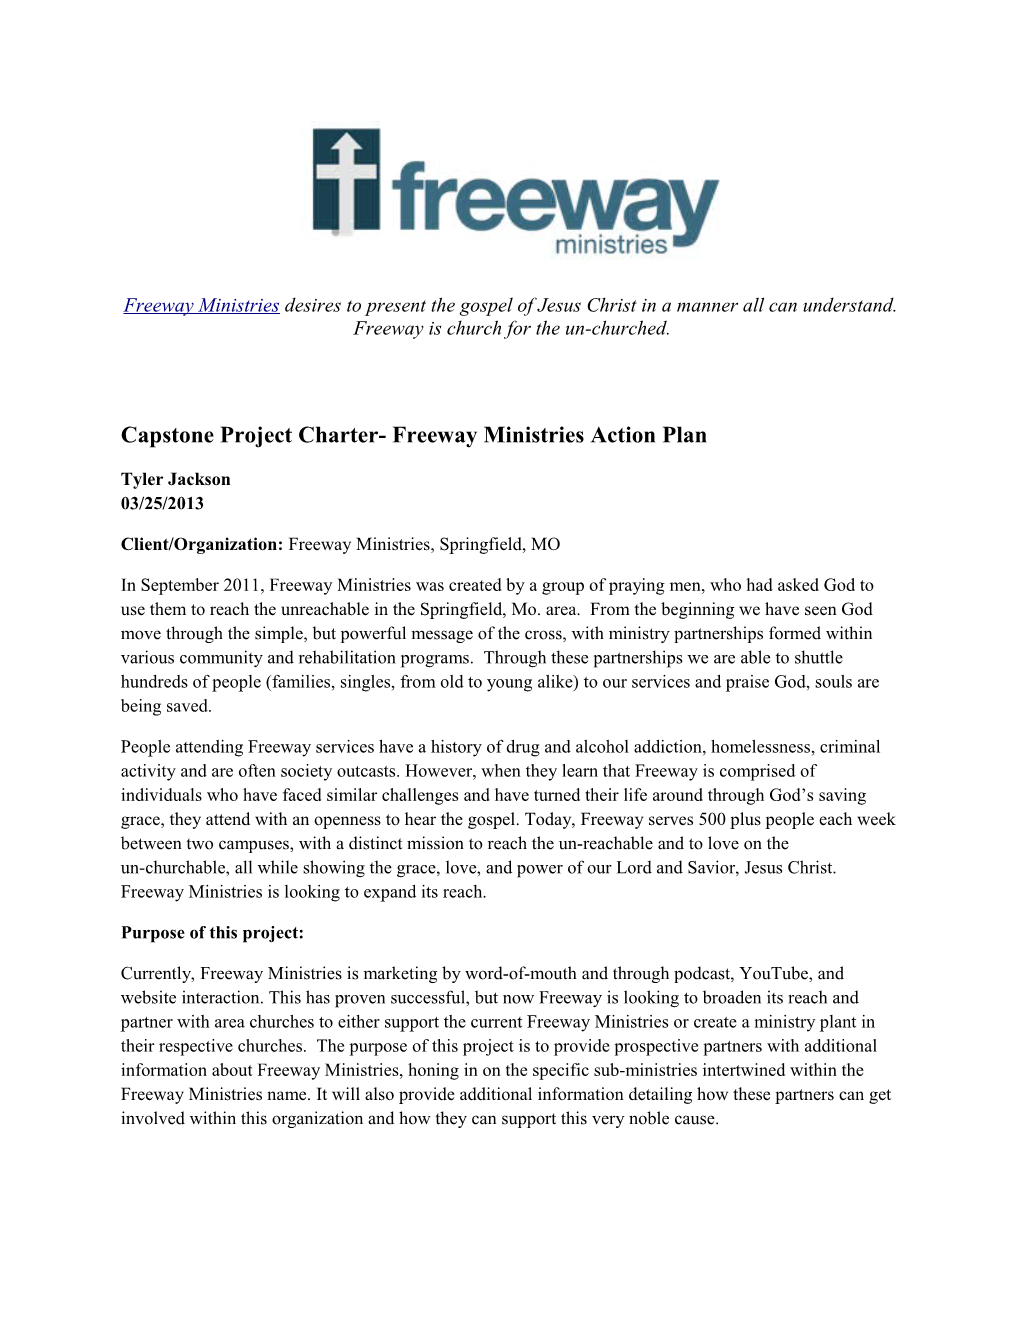 Capstone Project Charter- Freeway Ministries Action Plan